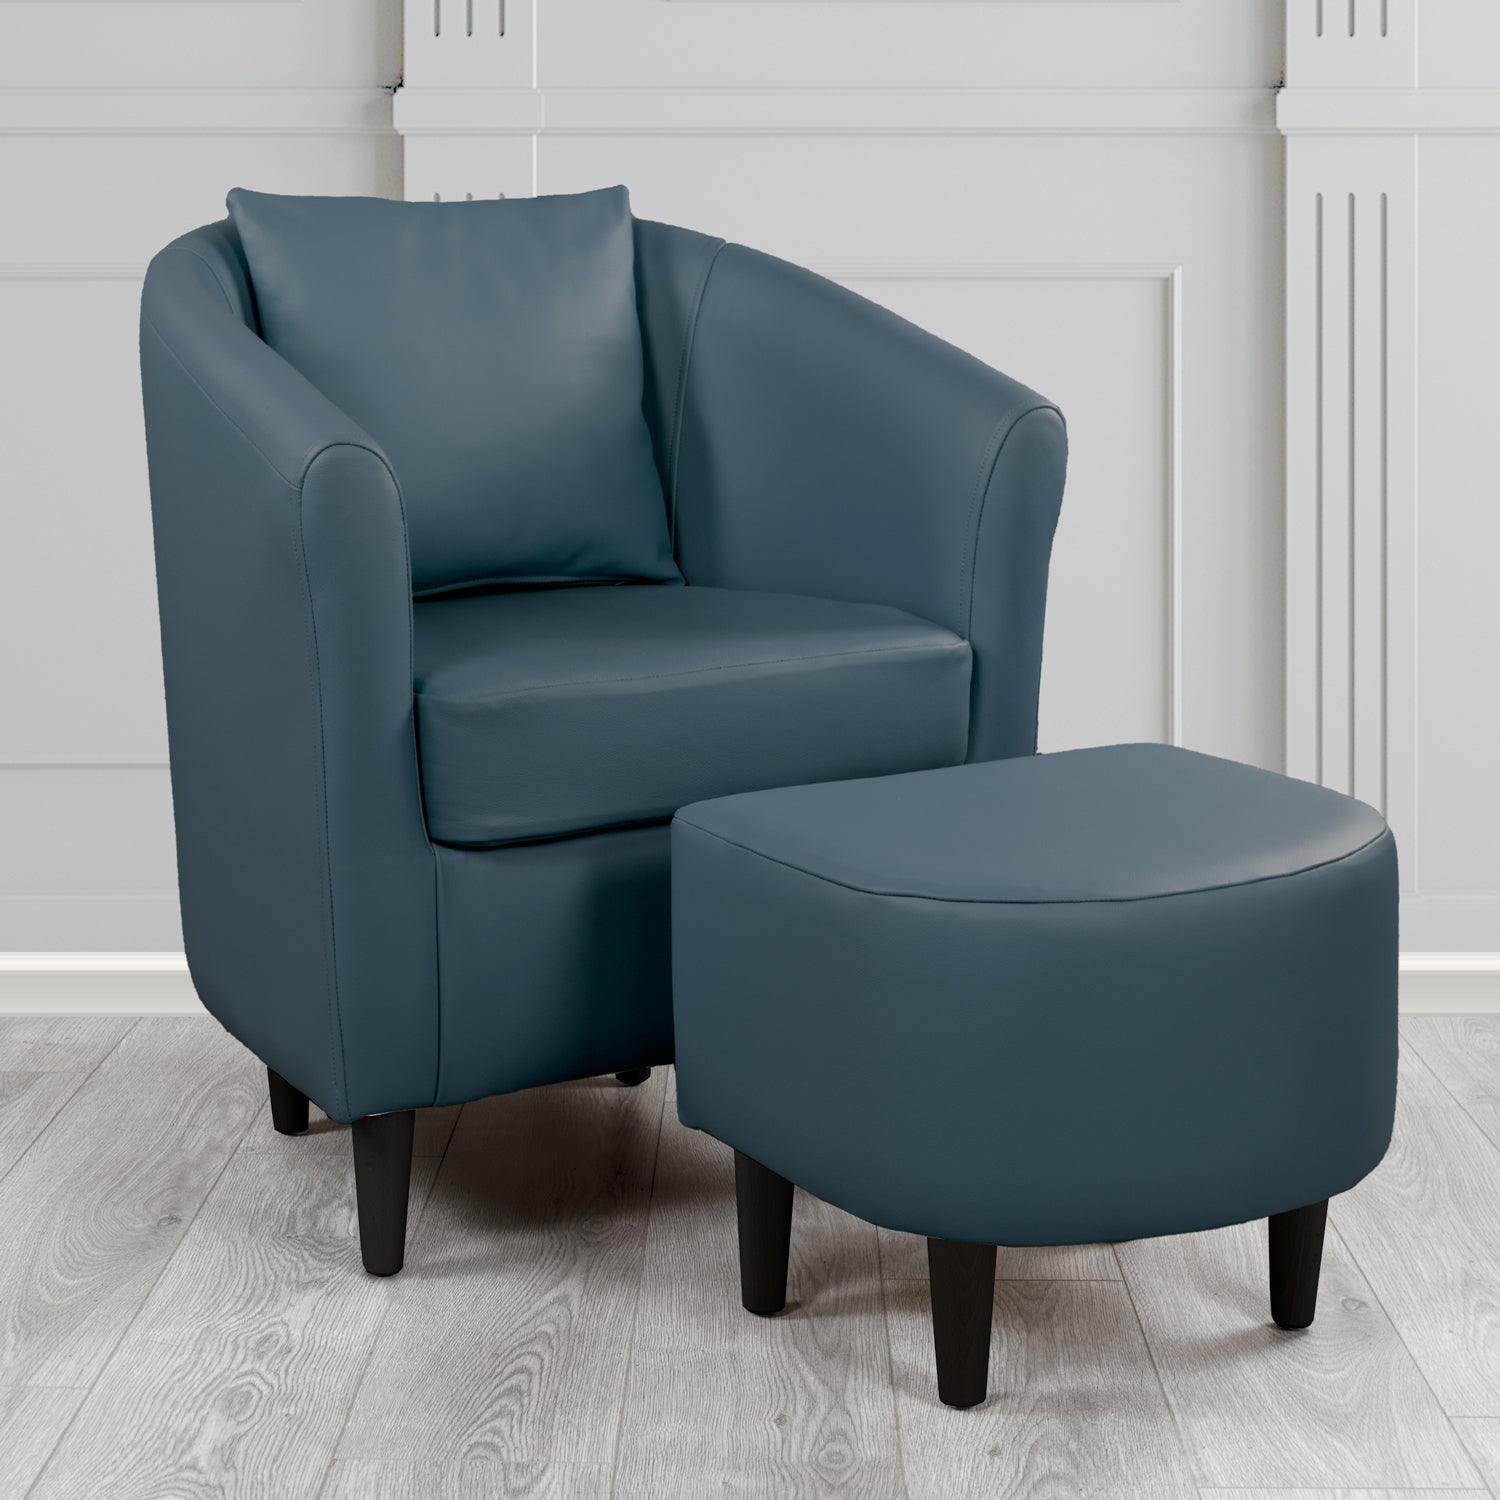 St Tropez Shelly Suffolk Blue Crib 5 Genuine Leather Tub Chair & Footstool Set With Scatter Cushion (6619541700650)